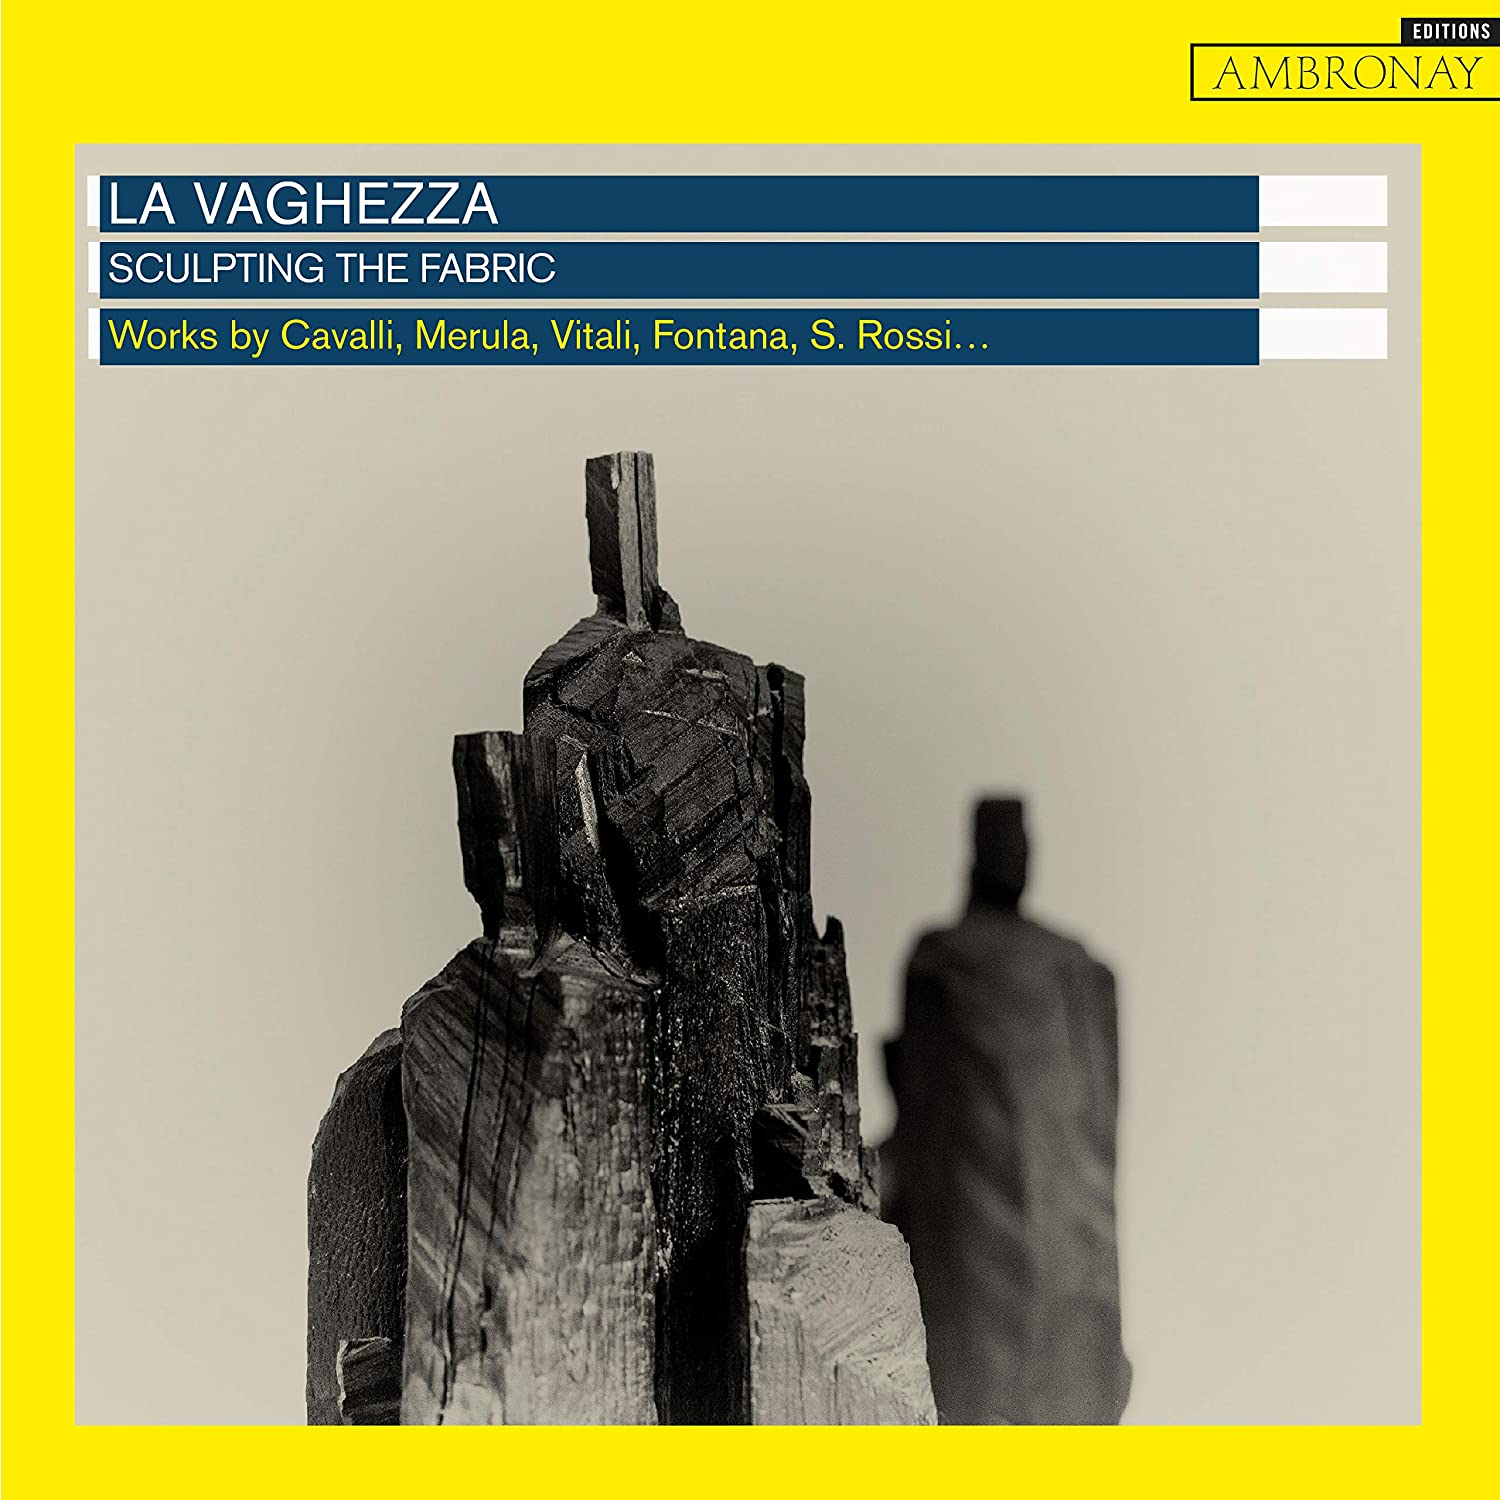 CD cover of La vaghezza Sculpting the fabric on Ambronay